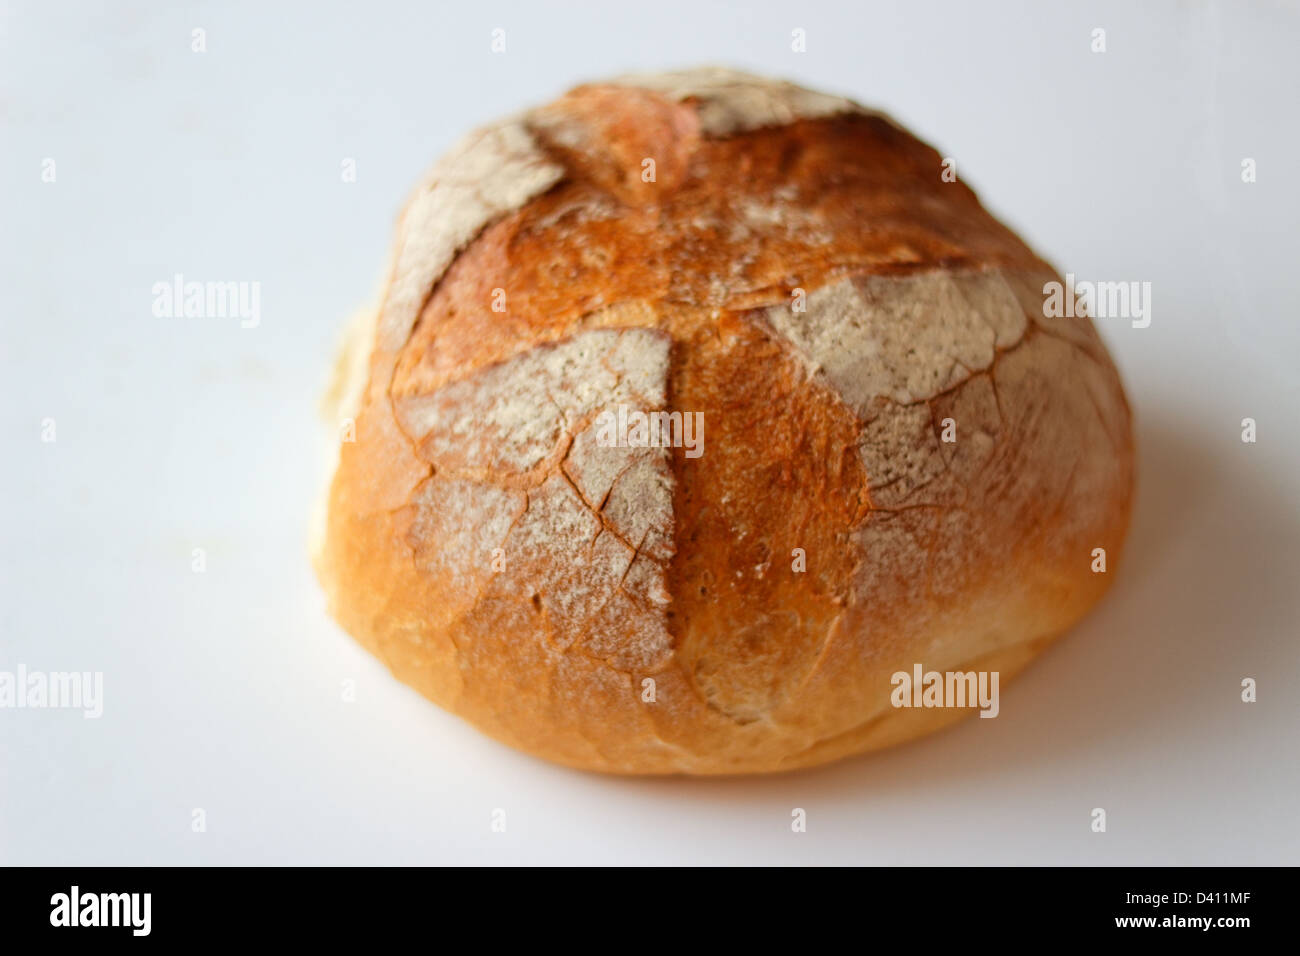 Loaf of crusty bread on a white background. Stock Photo